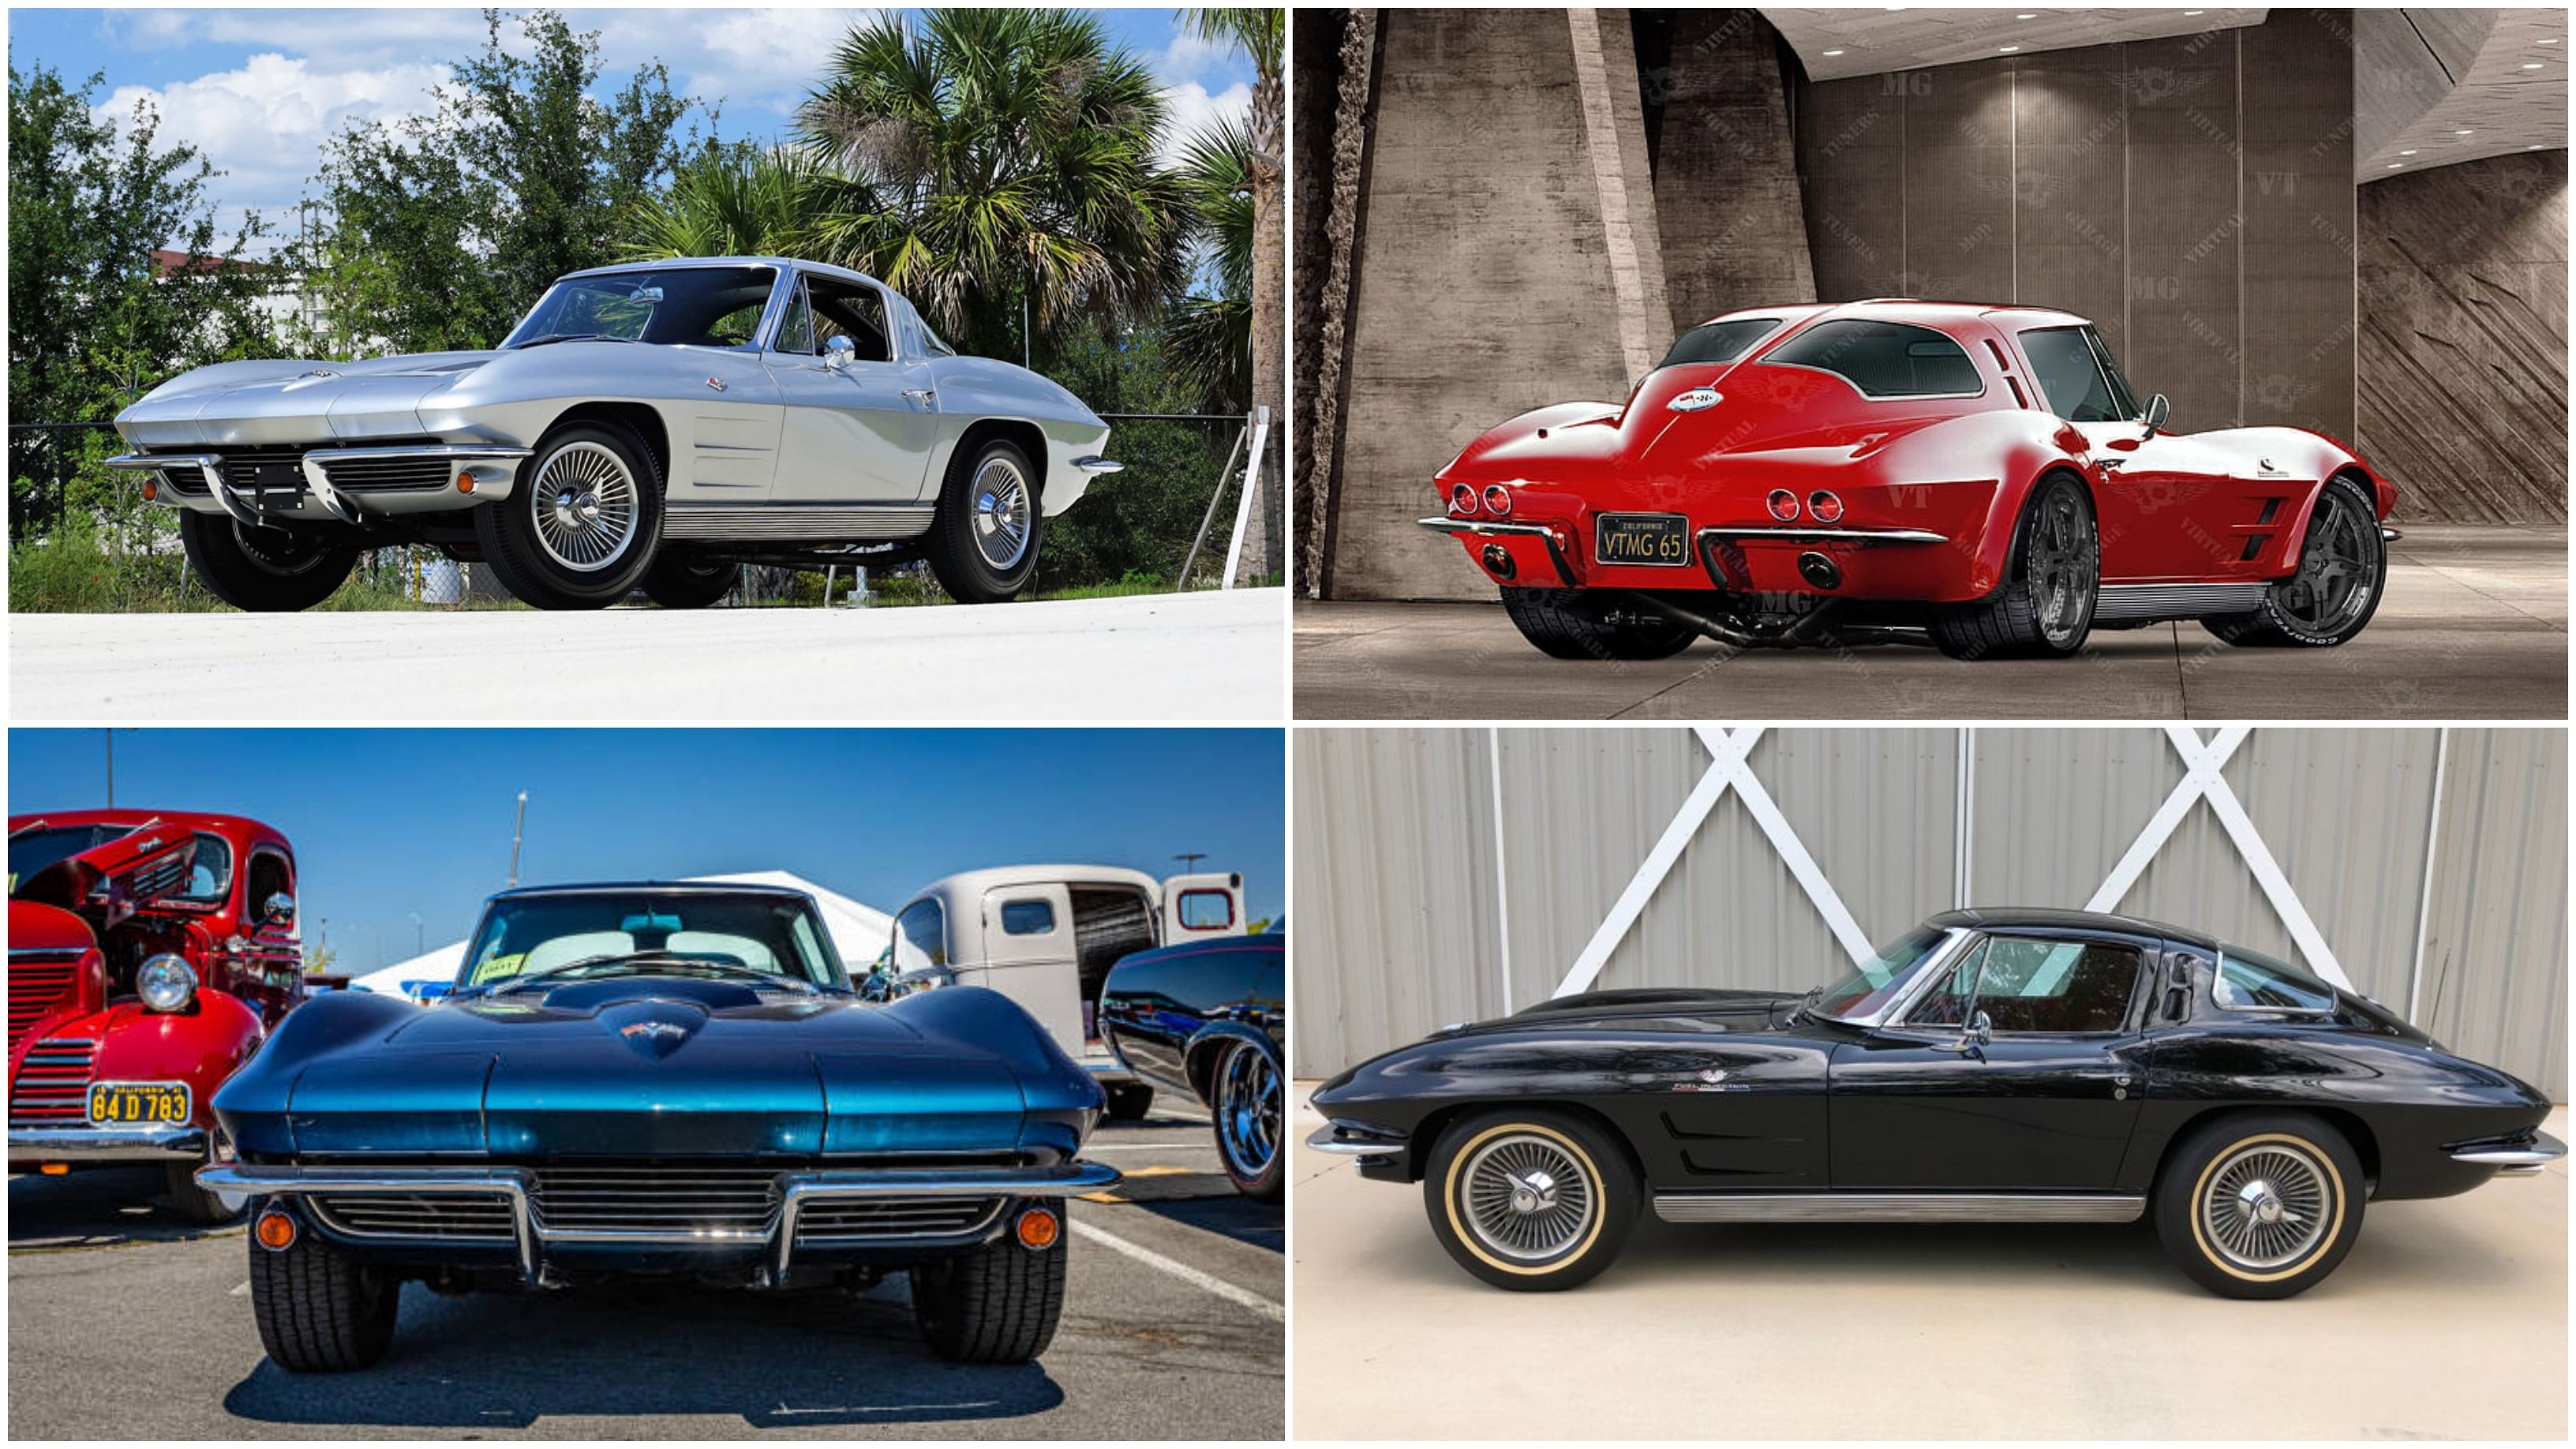 1963 Chevrolet Corvette Stingray in Silver, Red, Black, and Blue exterior color